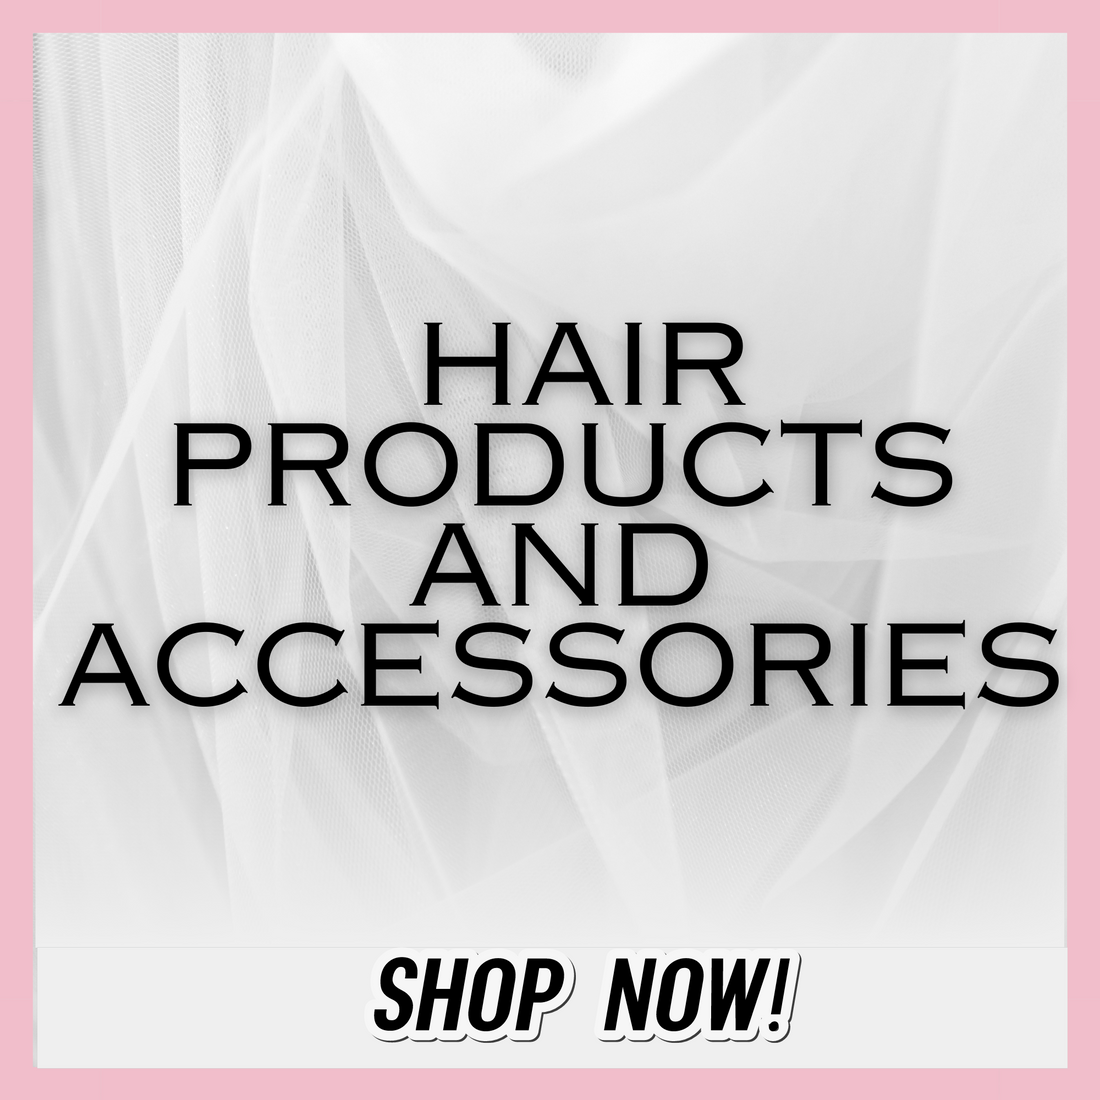  Hair Products & Accessories